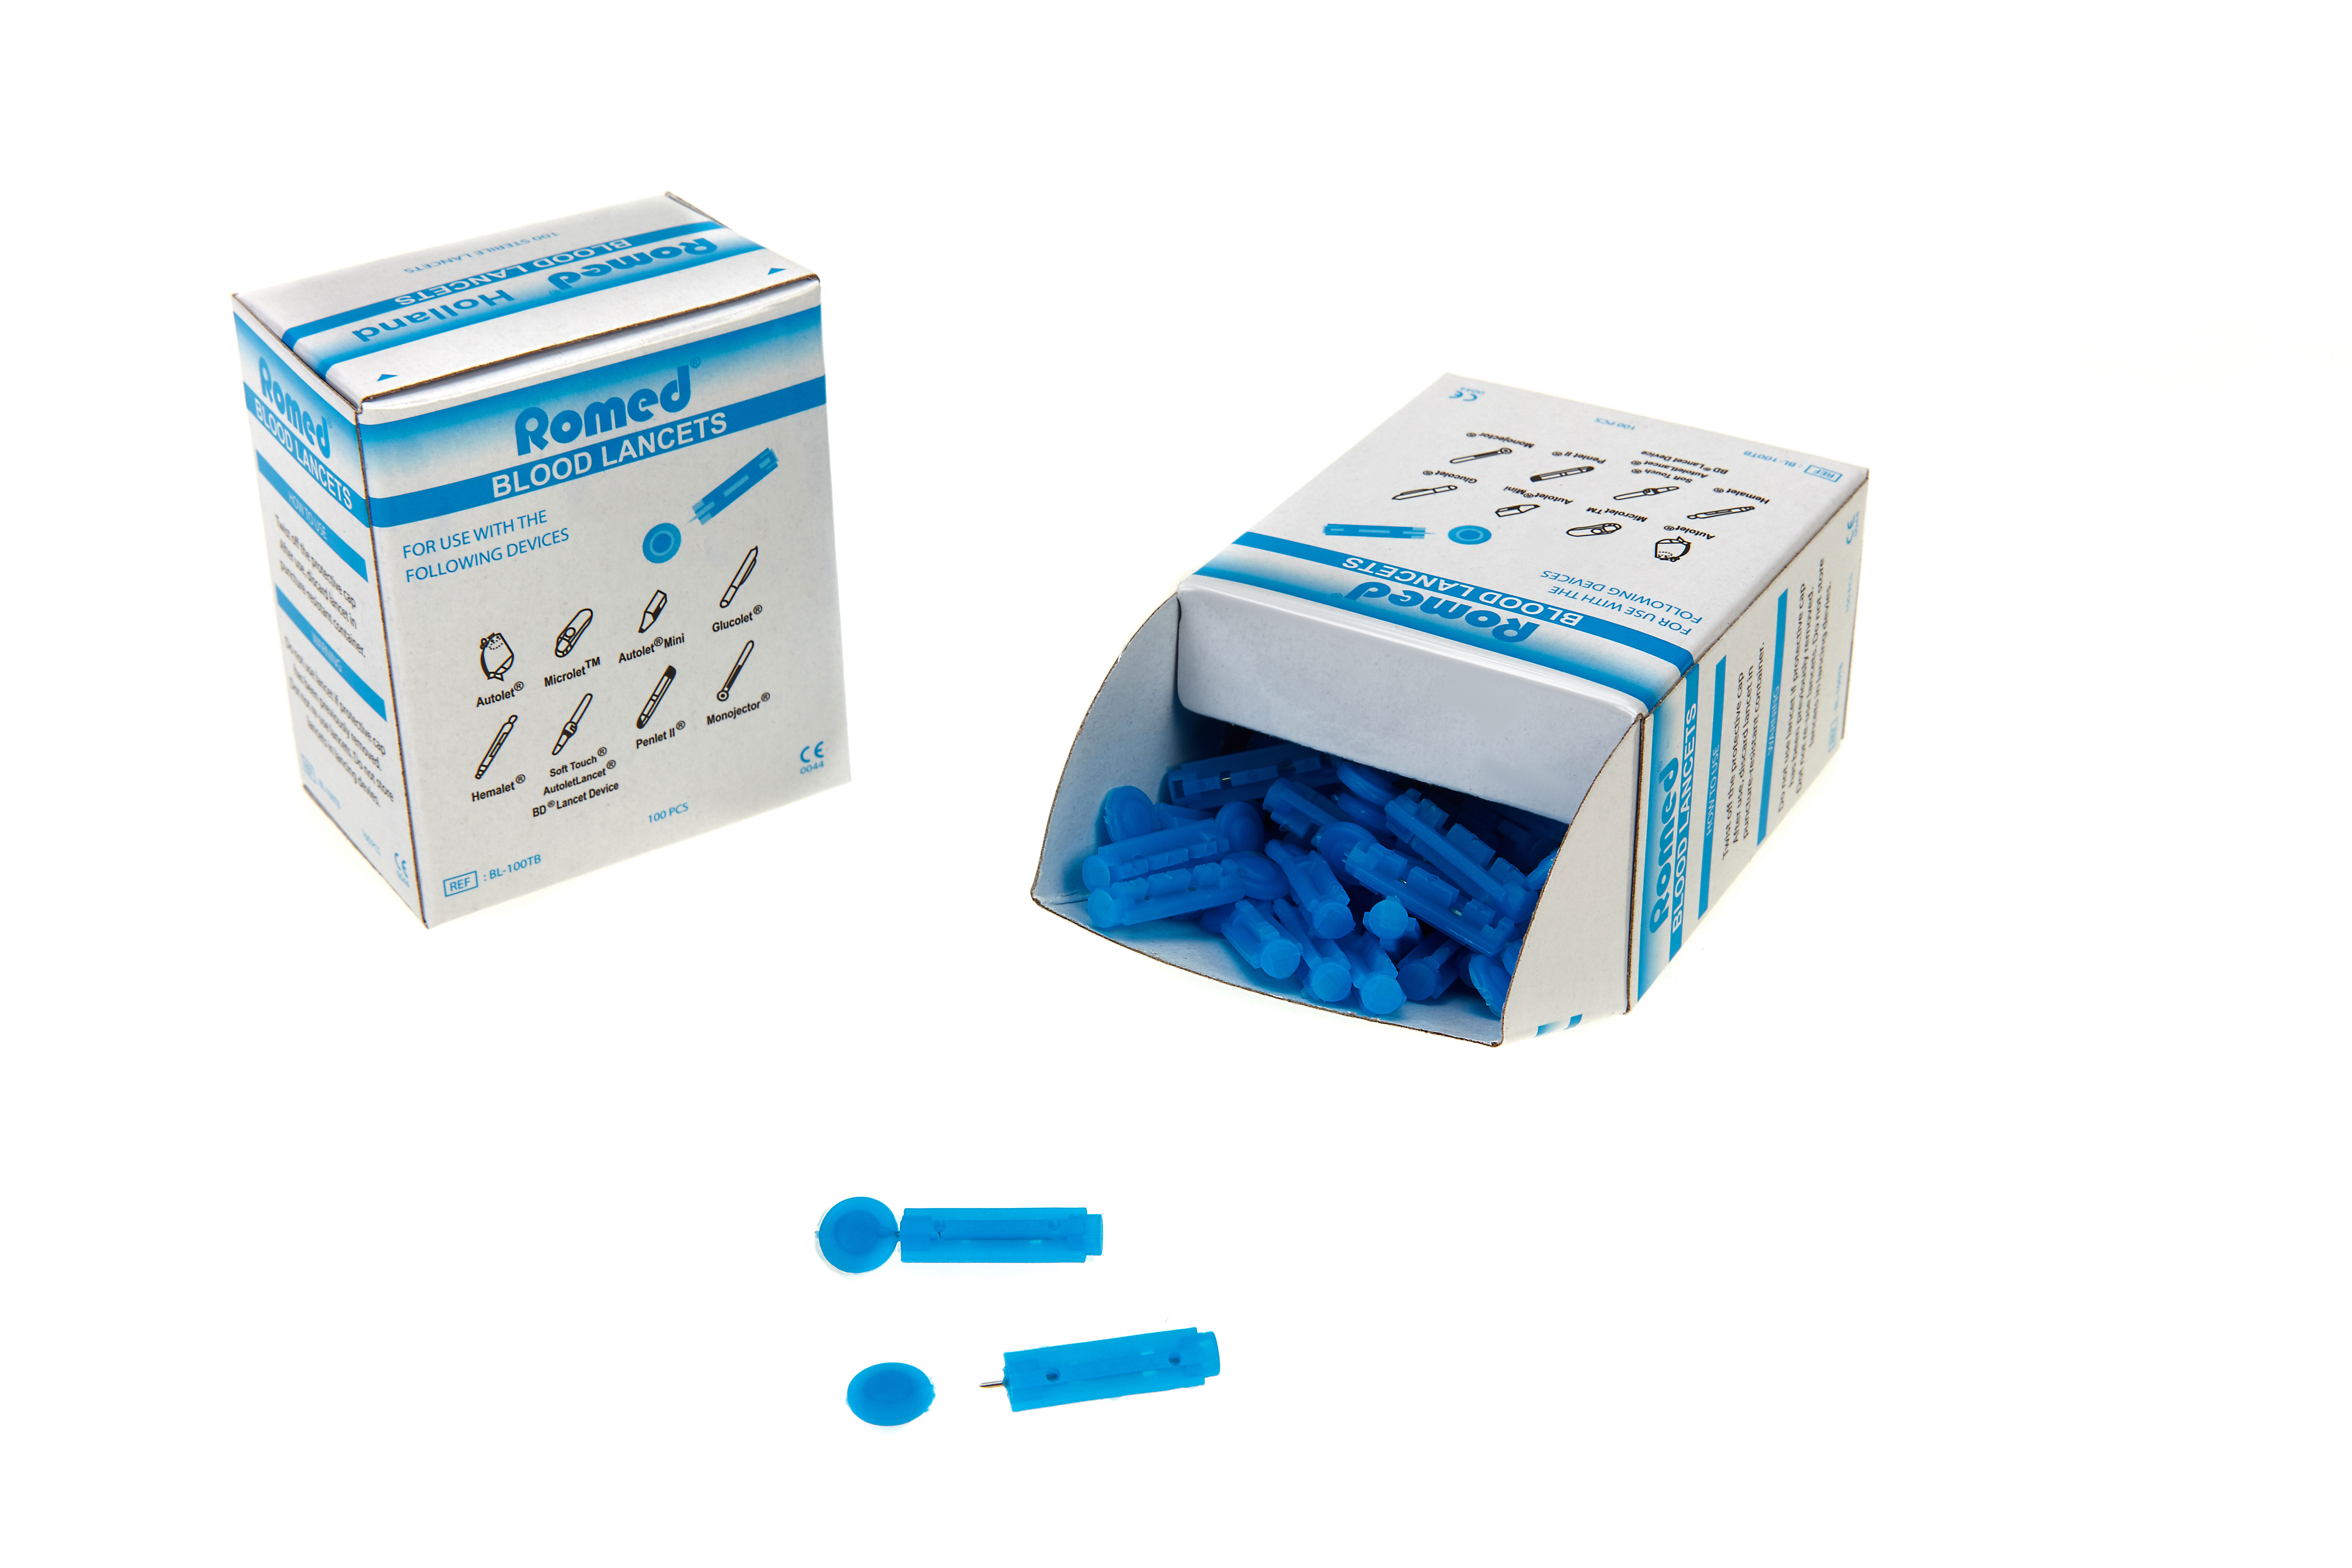 BL-100TB Romed blood lancets with tribevel, fine gauge, blue, sterile per piece, 100 pcs in a dispenser box, 5.000 pcs in an inner box, 4 x 5.000 pcs = 20.000 pcs in a carton.